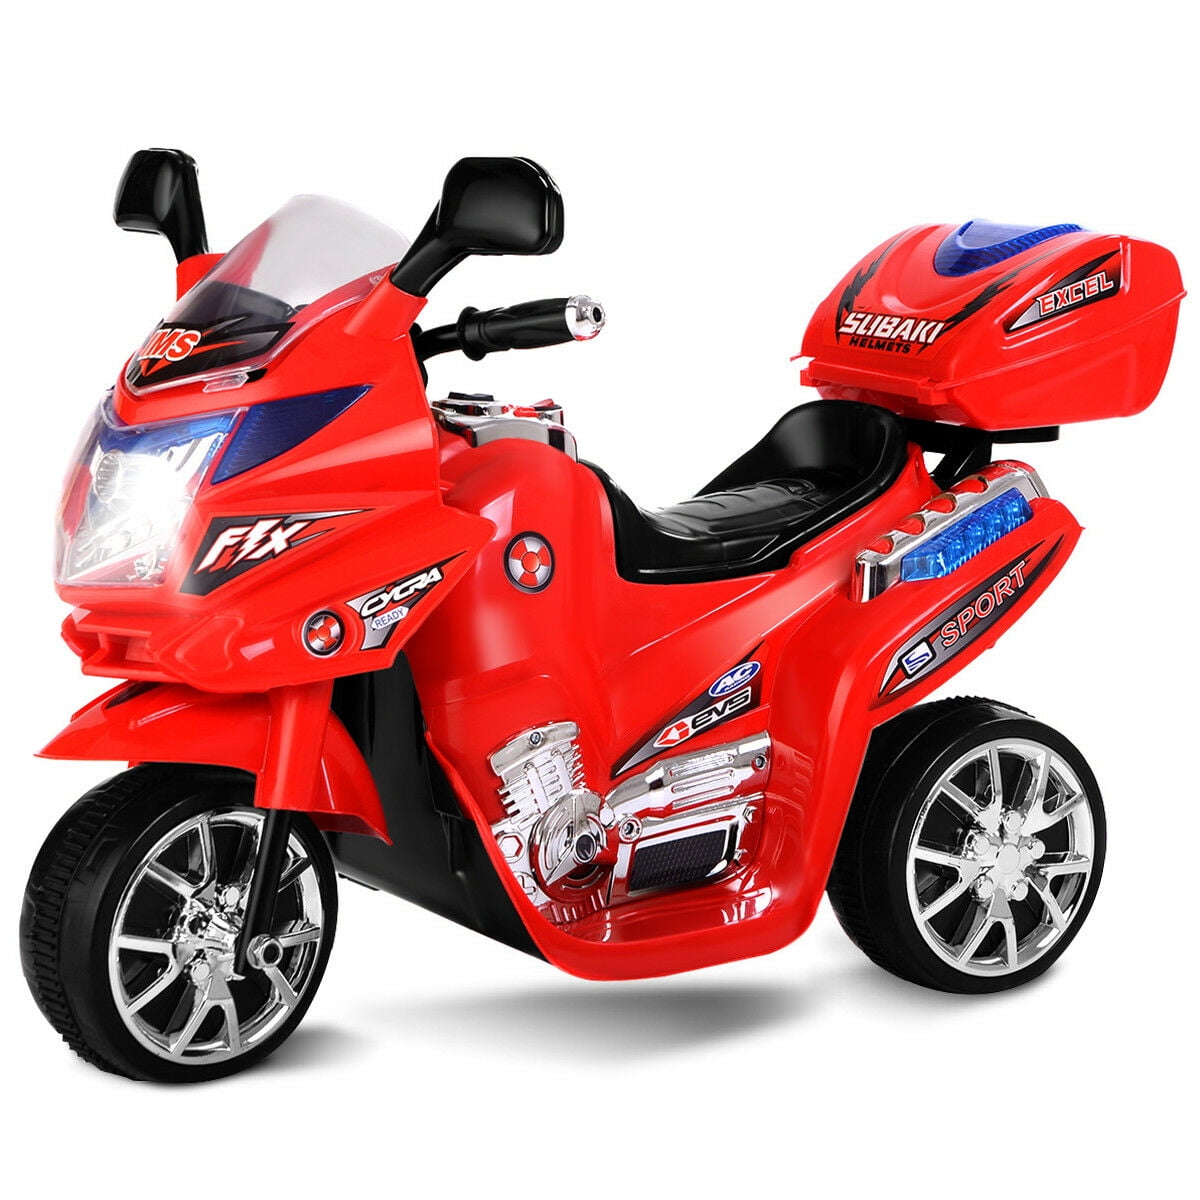 Alstoy Bike for Kids Toy R3 Bike with Rechargeable Battery Operated Ride on  for Boys and Girls | Electric Children Ride on [3 to 8 Years, Large, Red]…